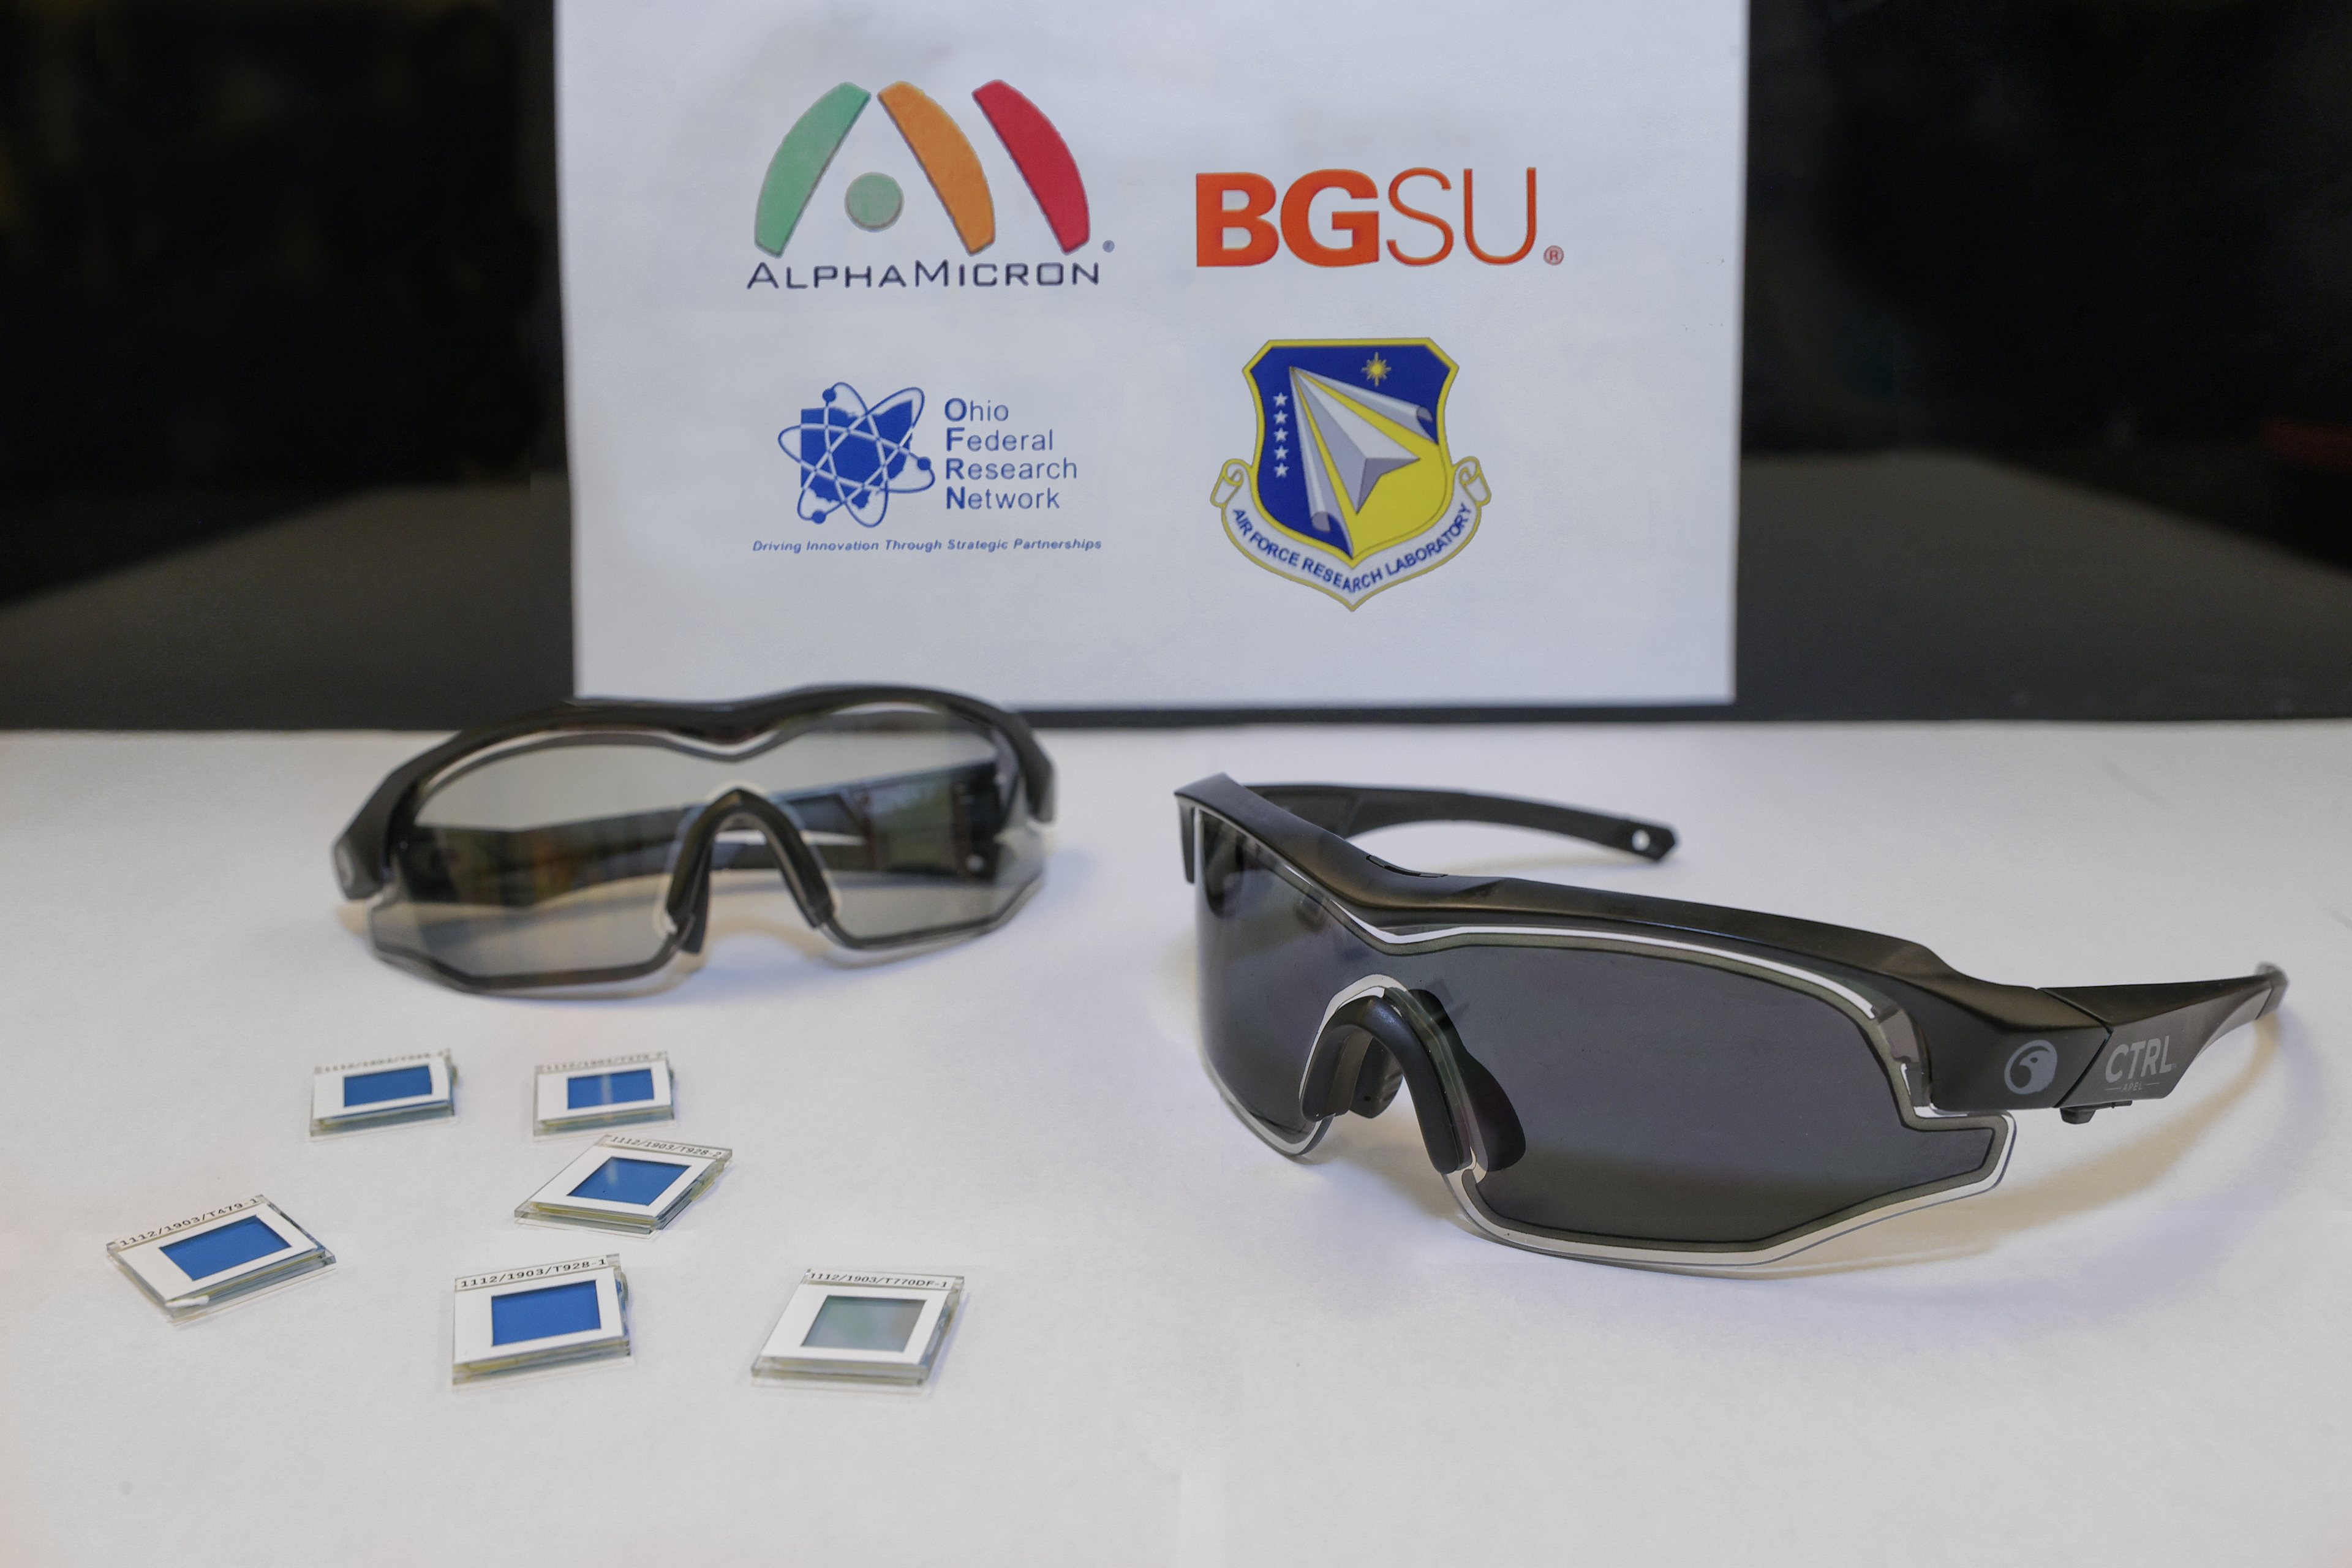 two pair of eyewear sitting on a paper with logos of BGSU, AlphaMicron, Ohio Federal Research Network, Air Force Research Laboratory 